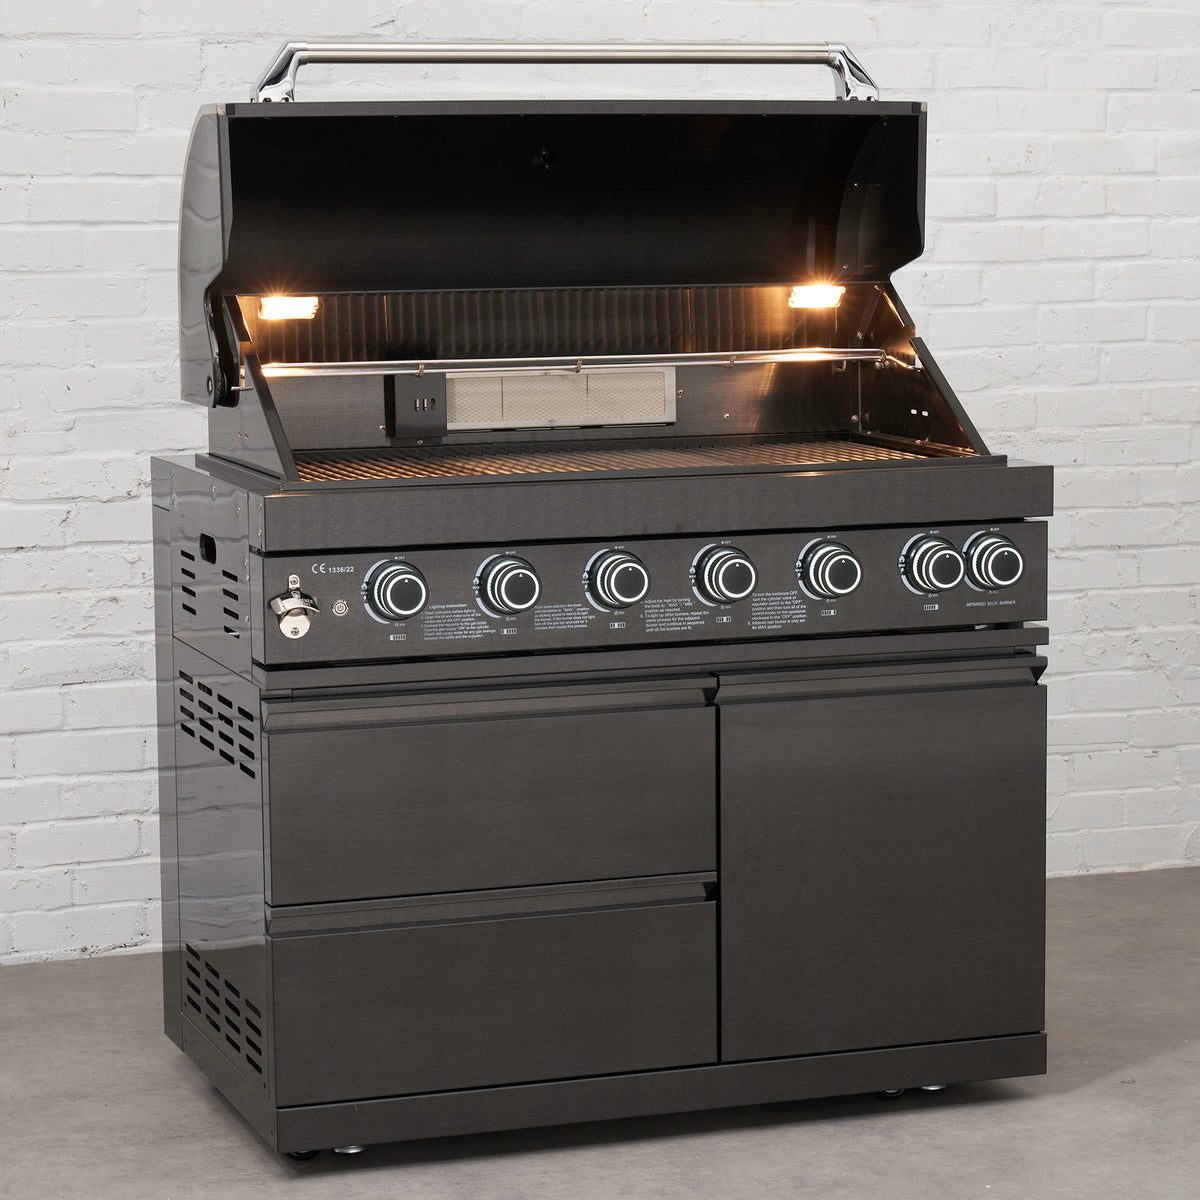 Draco Grills 6 Burner BBQ Black Stainless Steel Modular Outdoor Kitchen with Sear Station and Fridge Unit